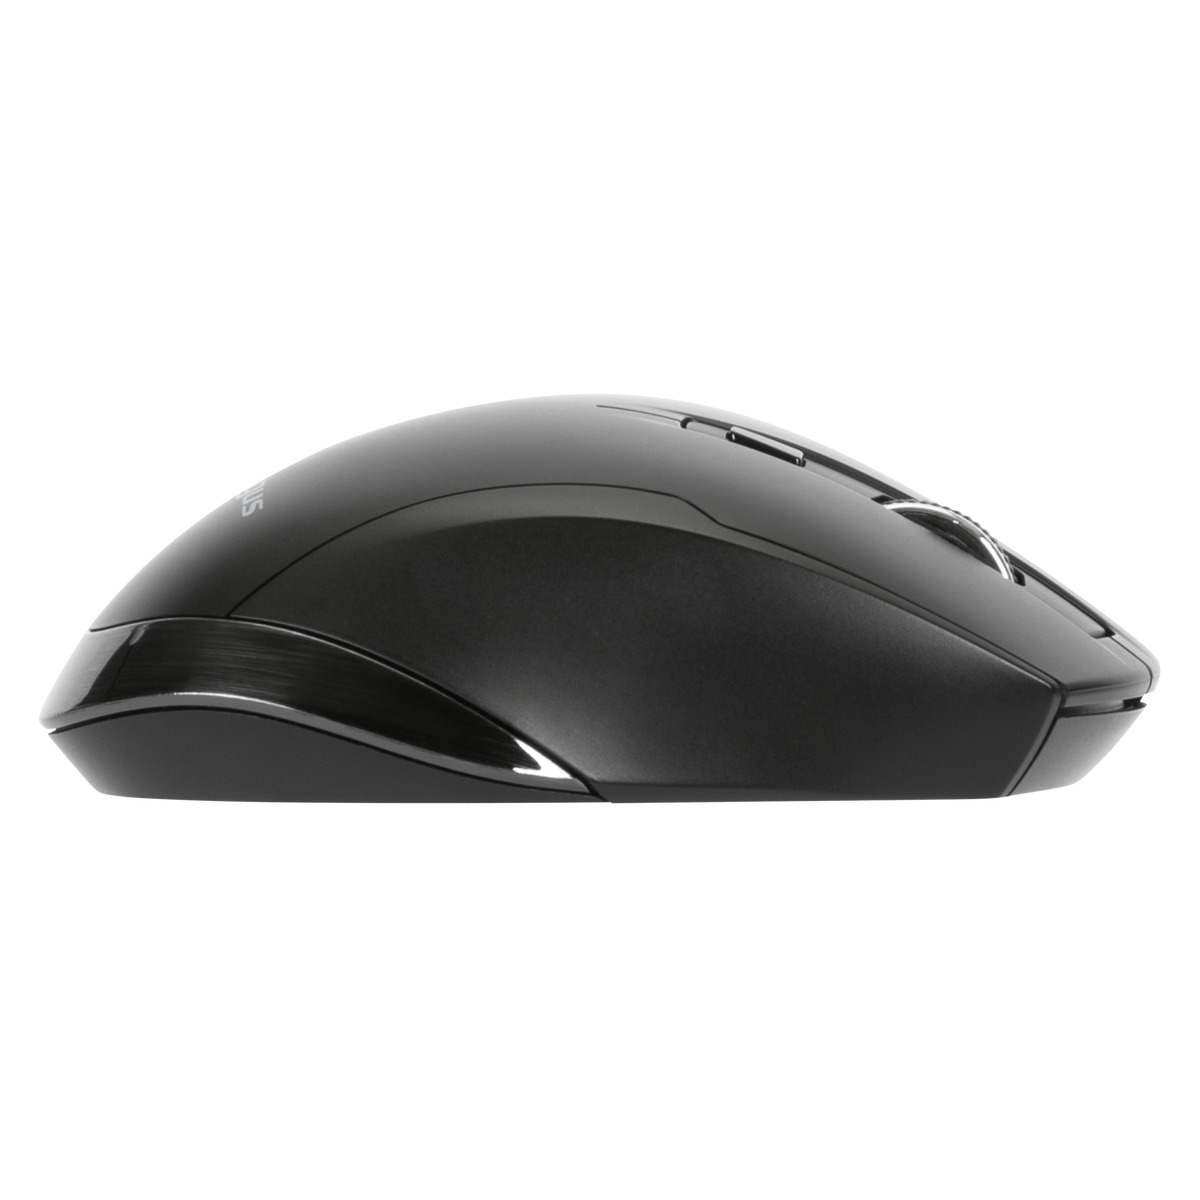  - Mouse inalmbrico antimicrobial blue Trace Targus 2